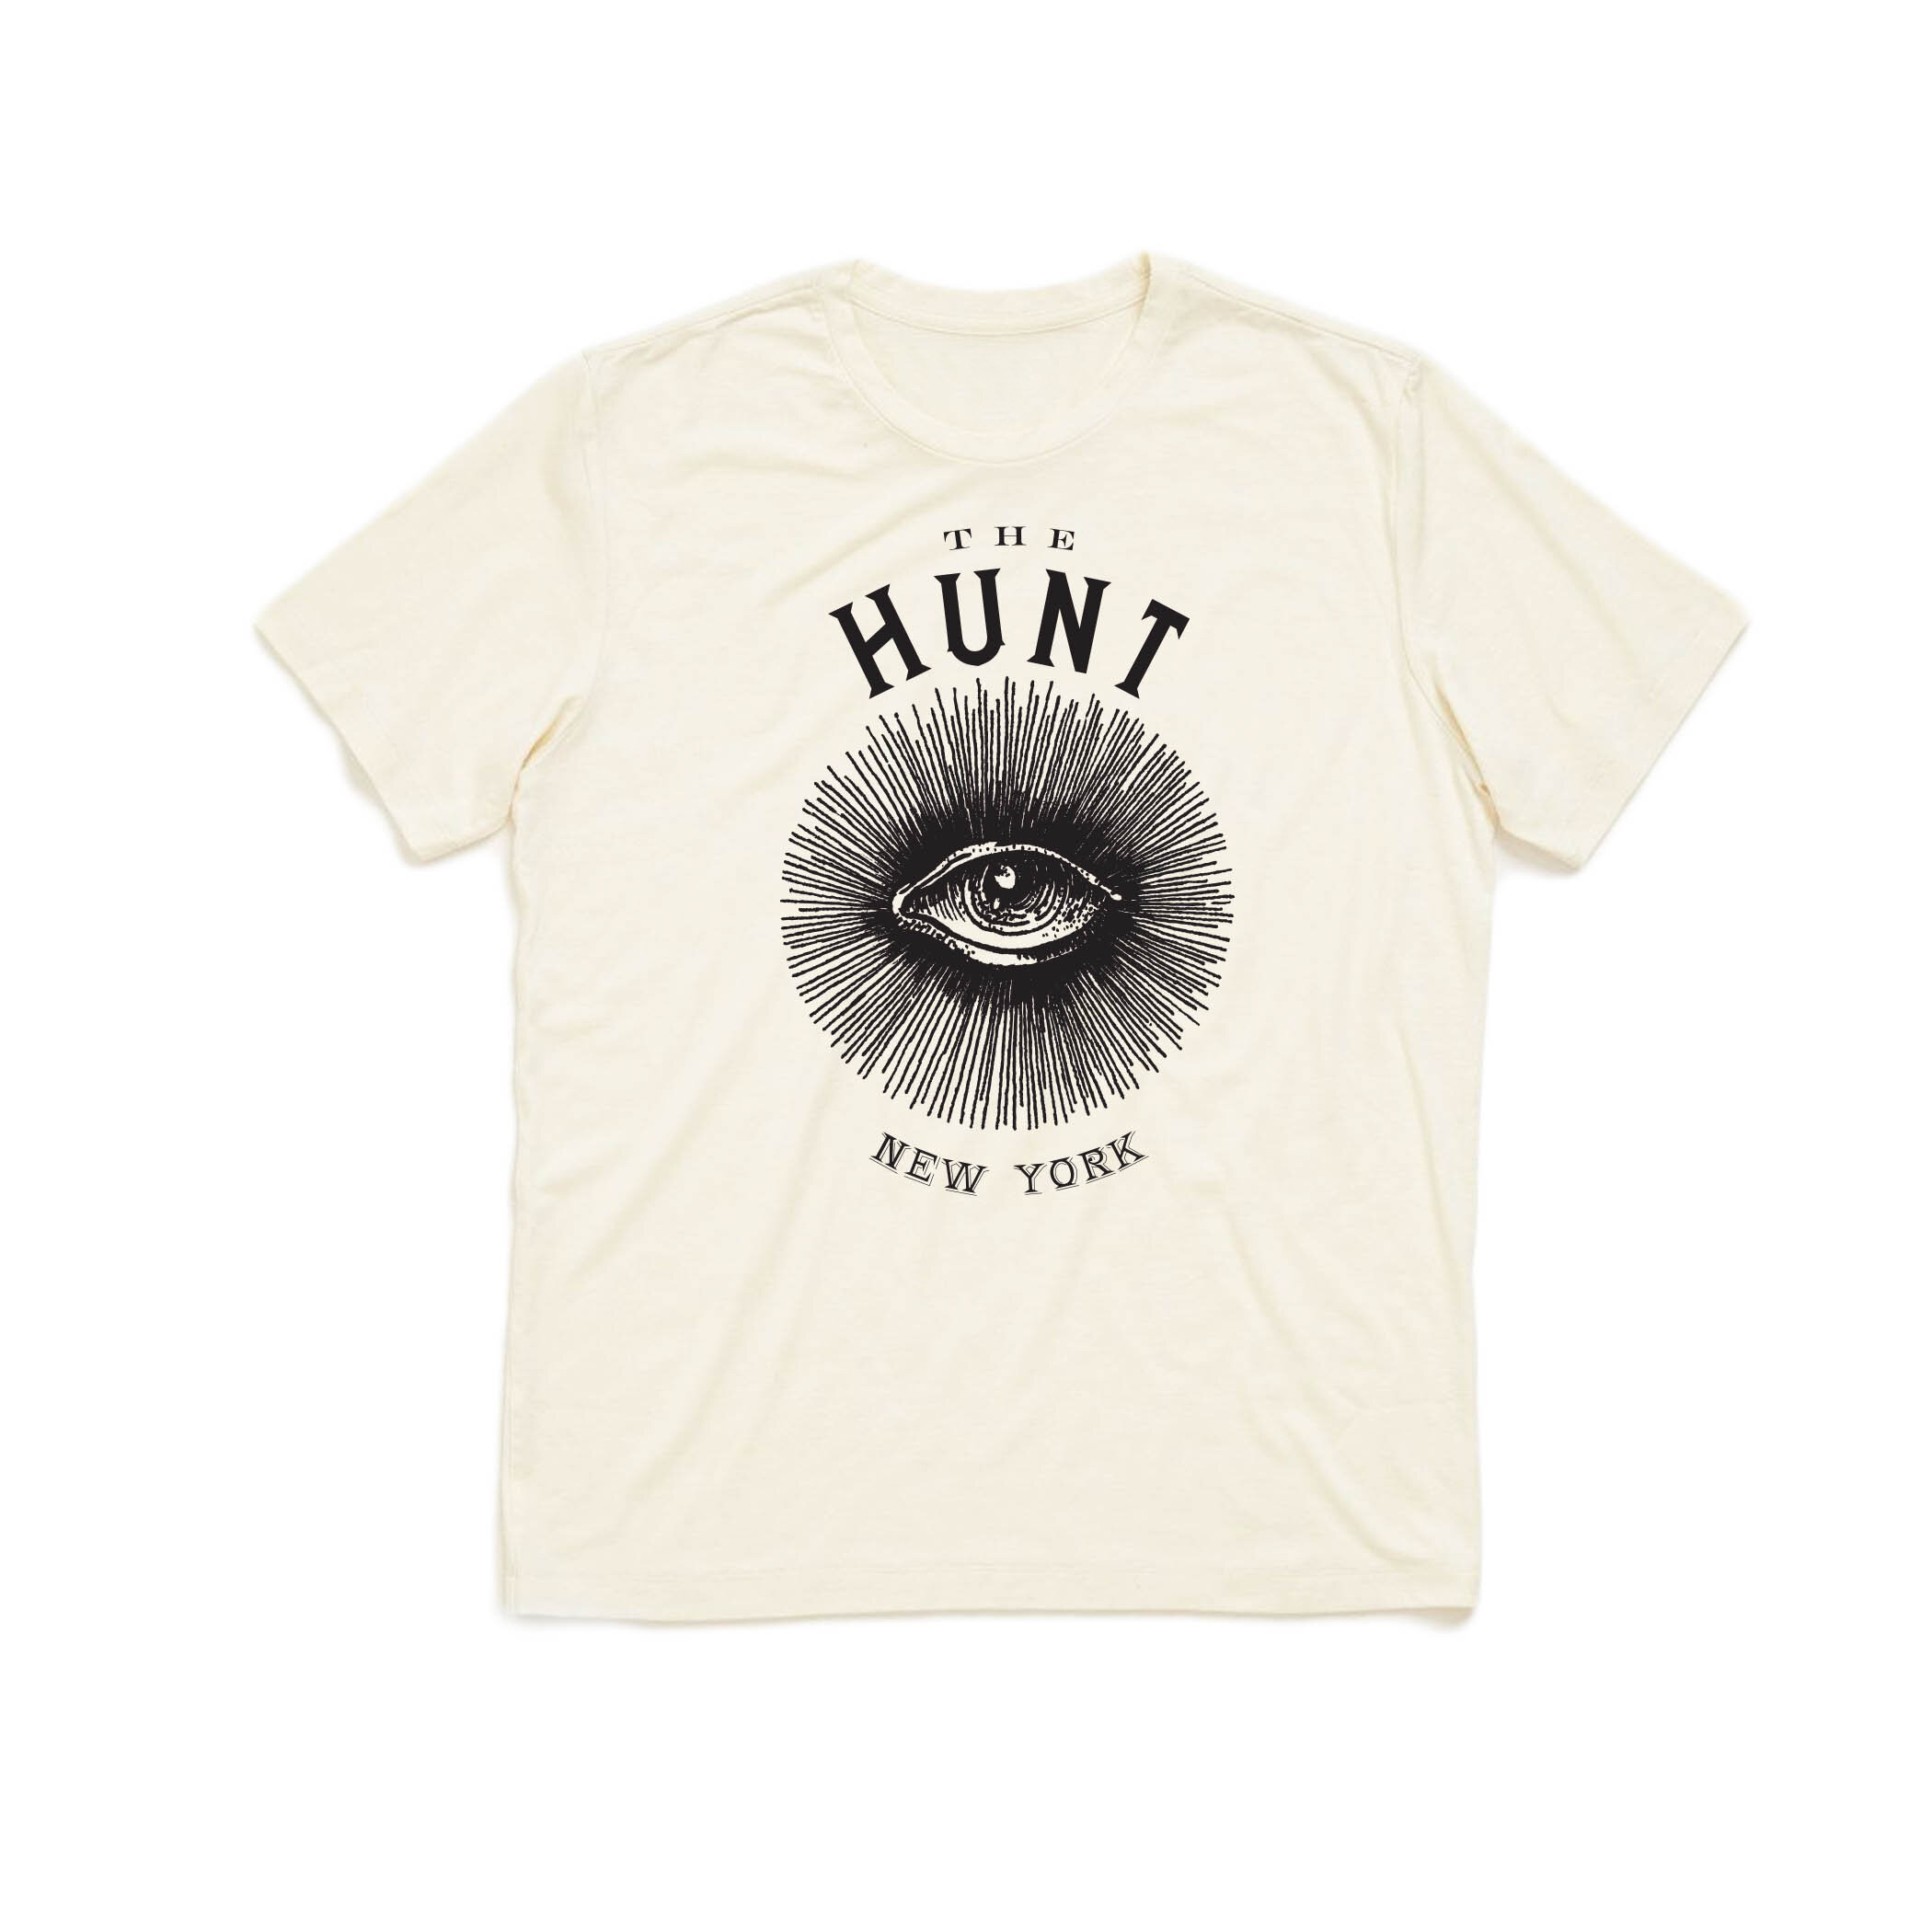 Get the Essential Look with The HUNT NYC's Basic T-Shirt — THE HUNT NYC